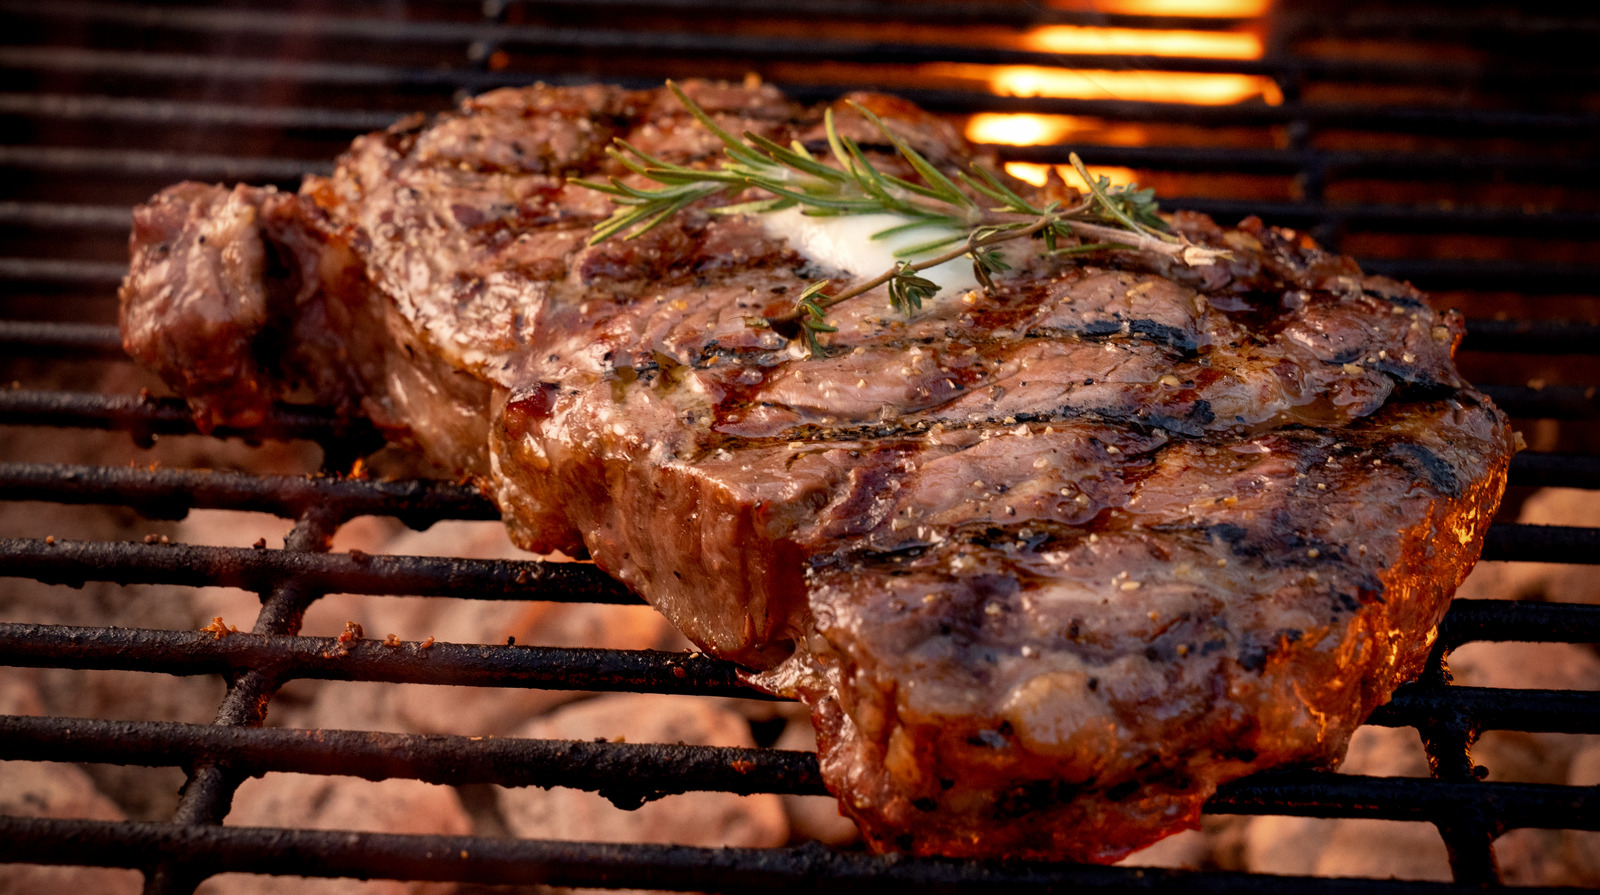 12 Essential Tips For Grilling Steak, According To Hugh Acheson